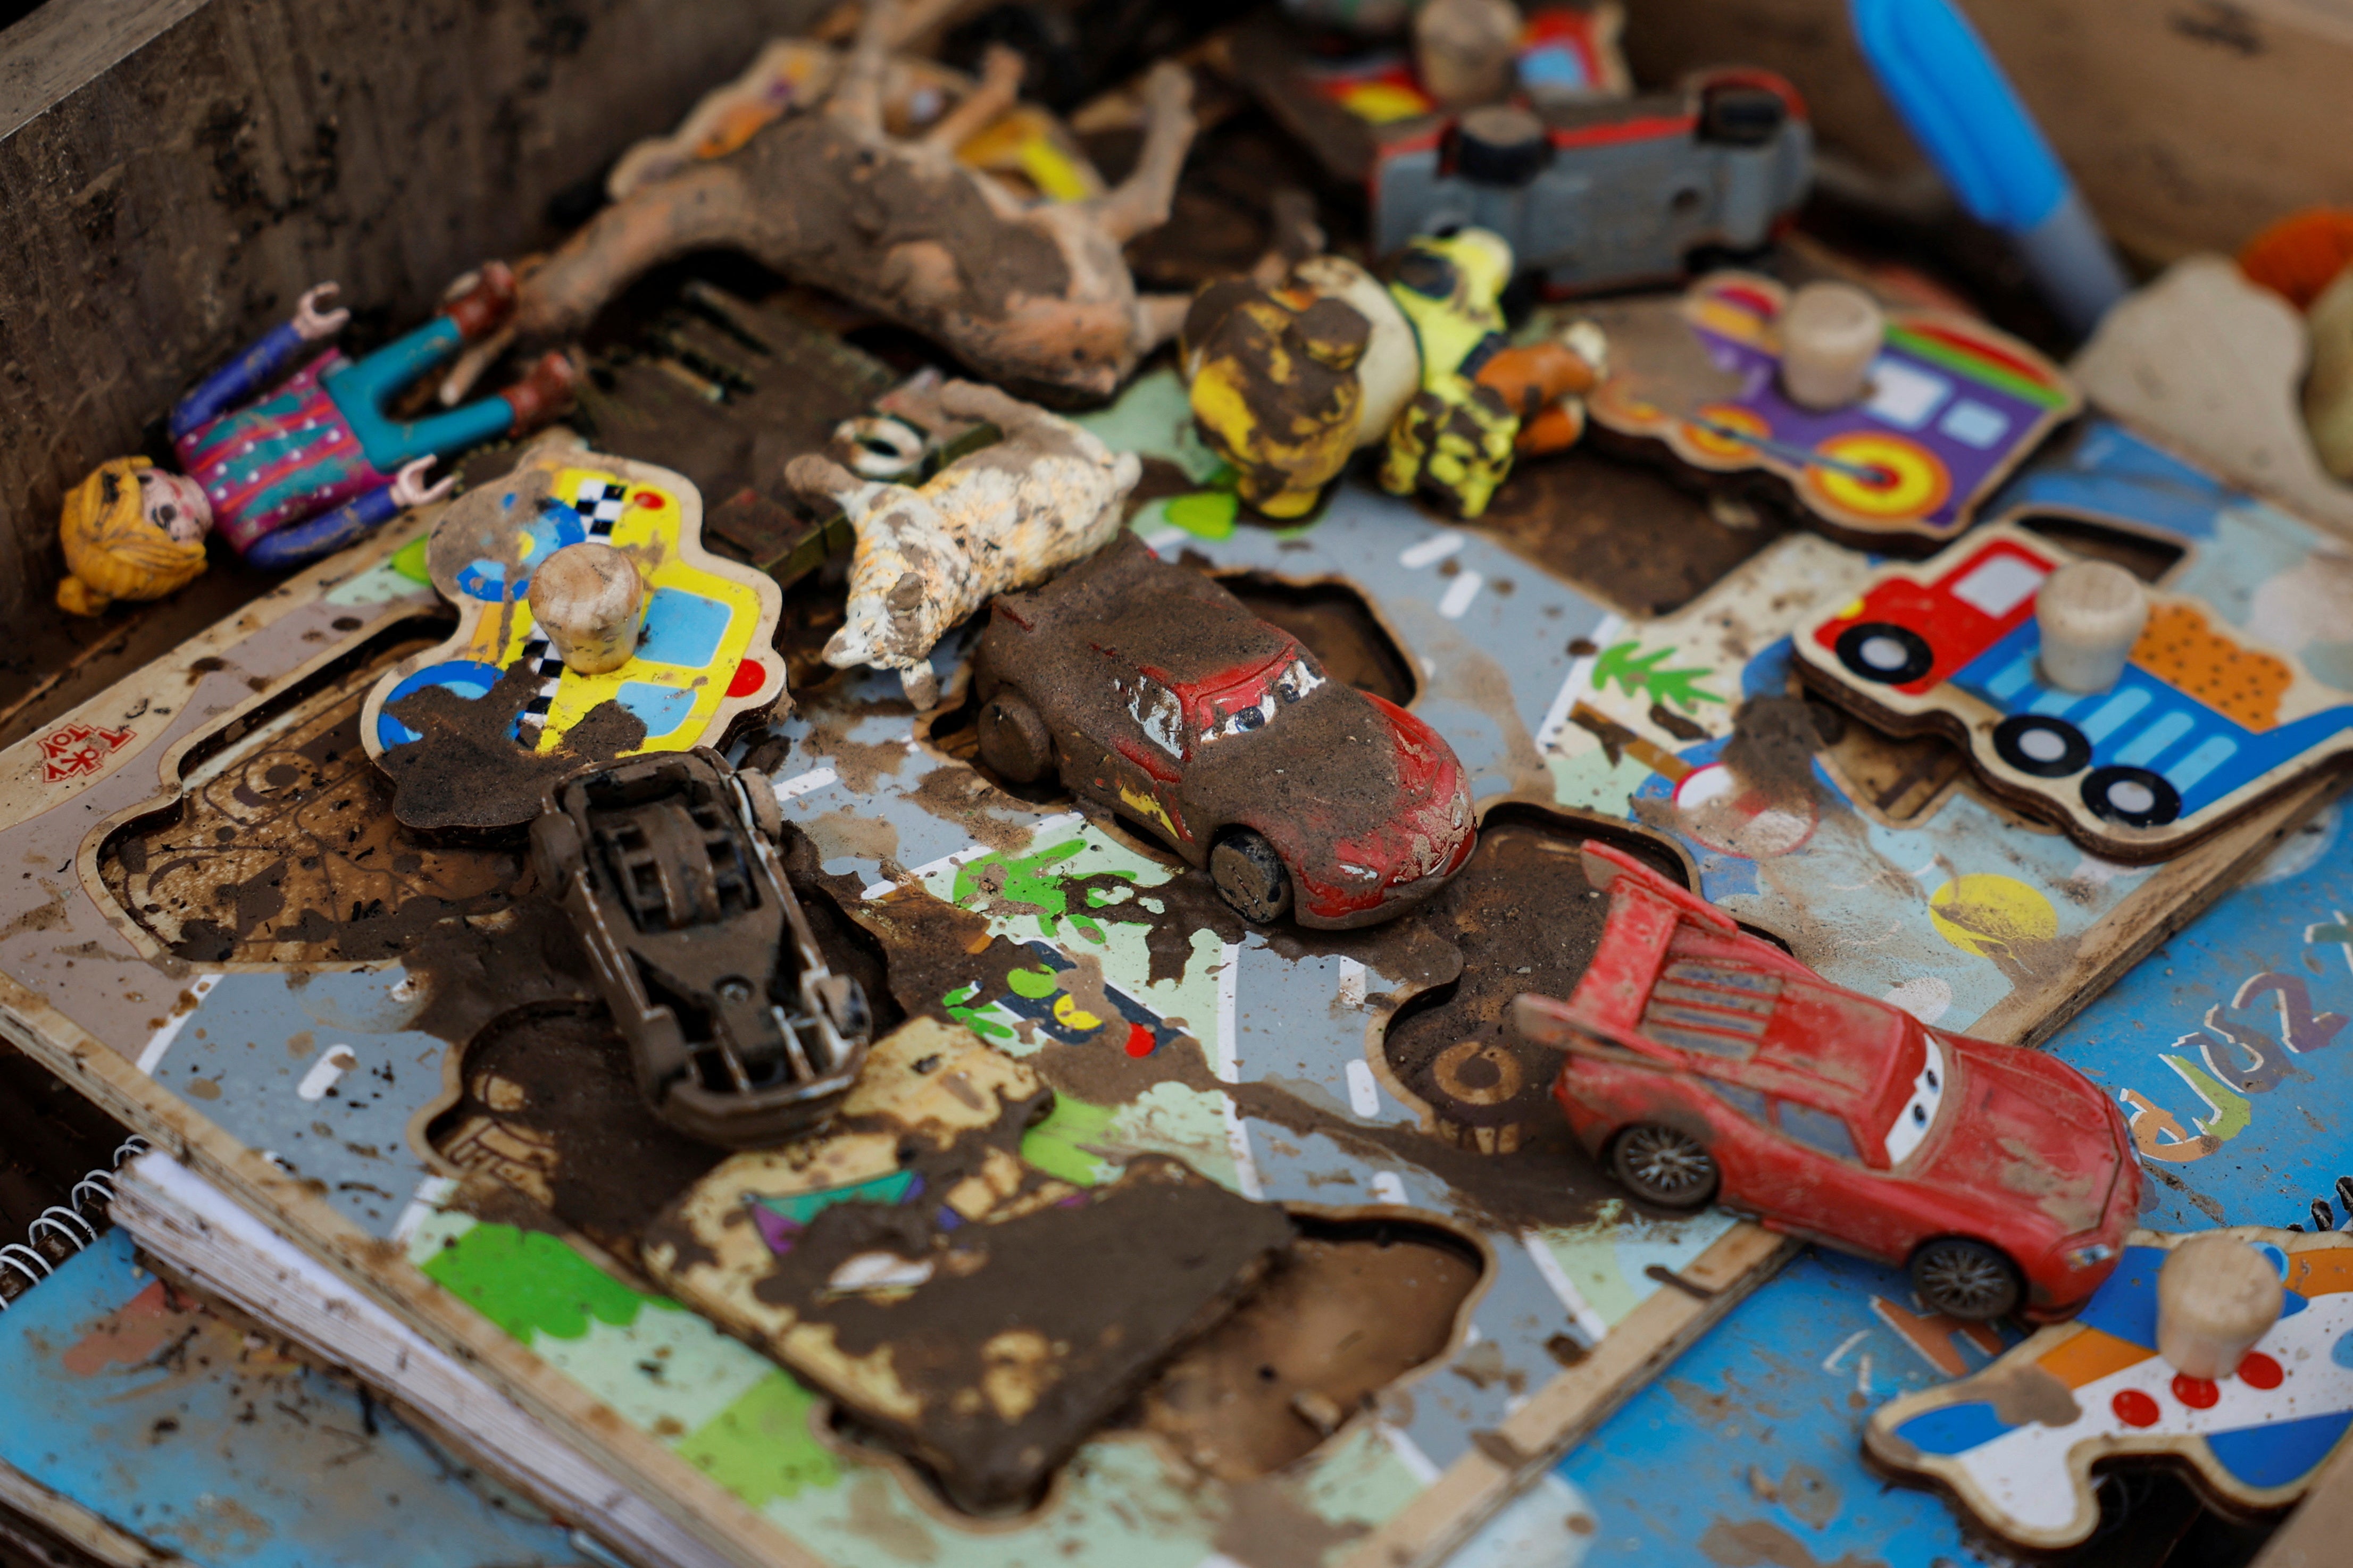 Children’s toys and books sit covered in mud at Tsiamitas’s house